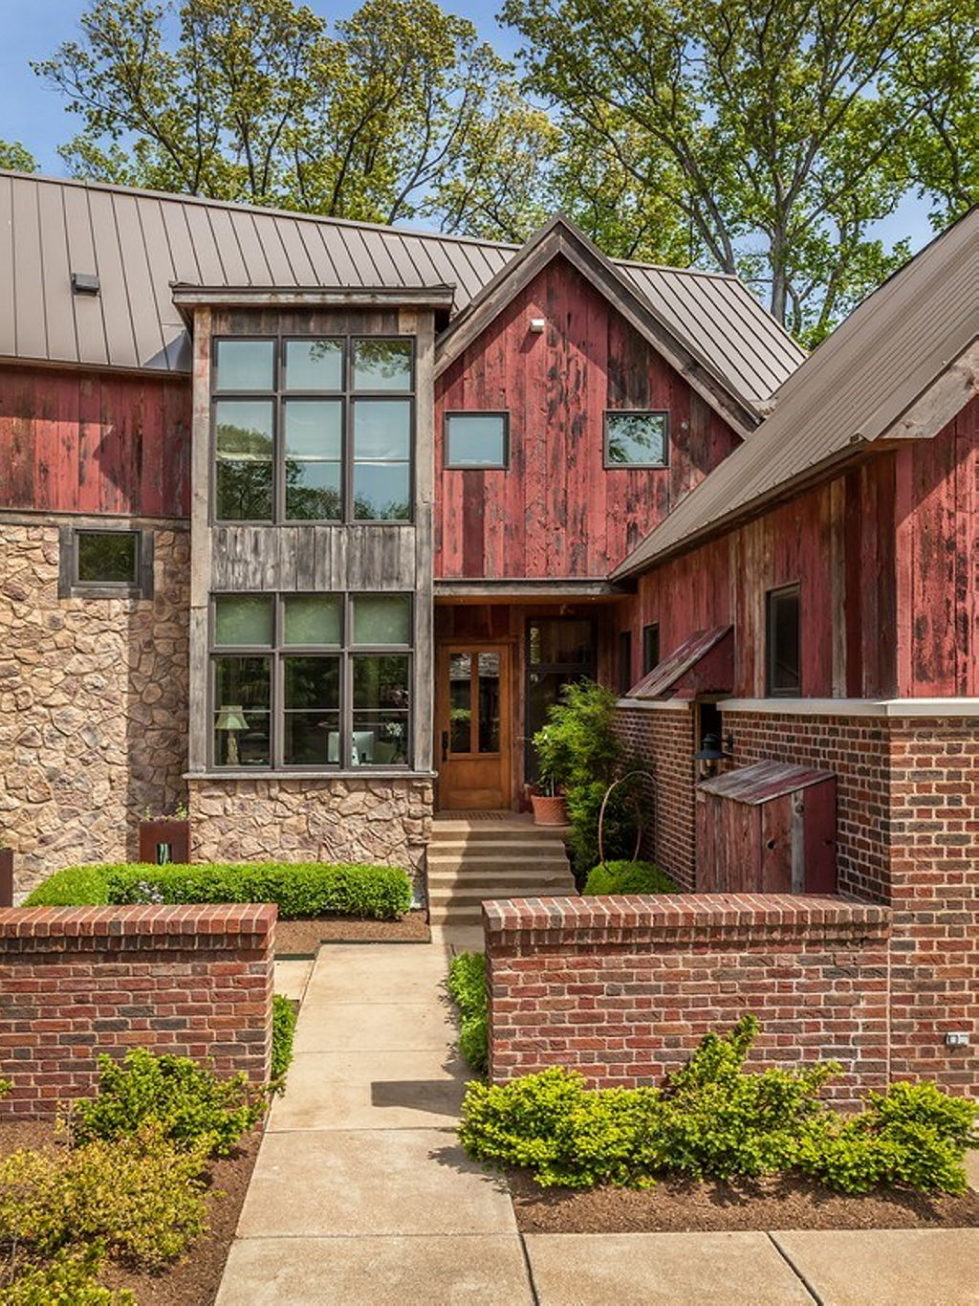 The charming village house in Indianapolis, Indiana, USA is displayed for sale for $ 2.5 million 32